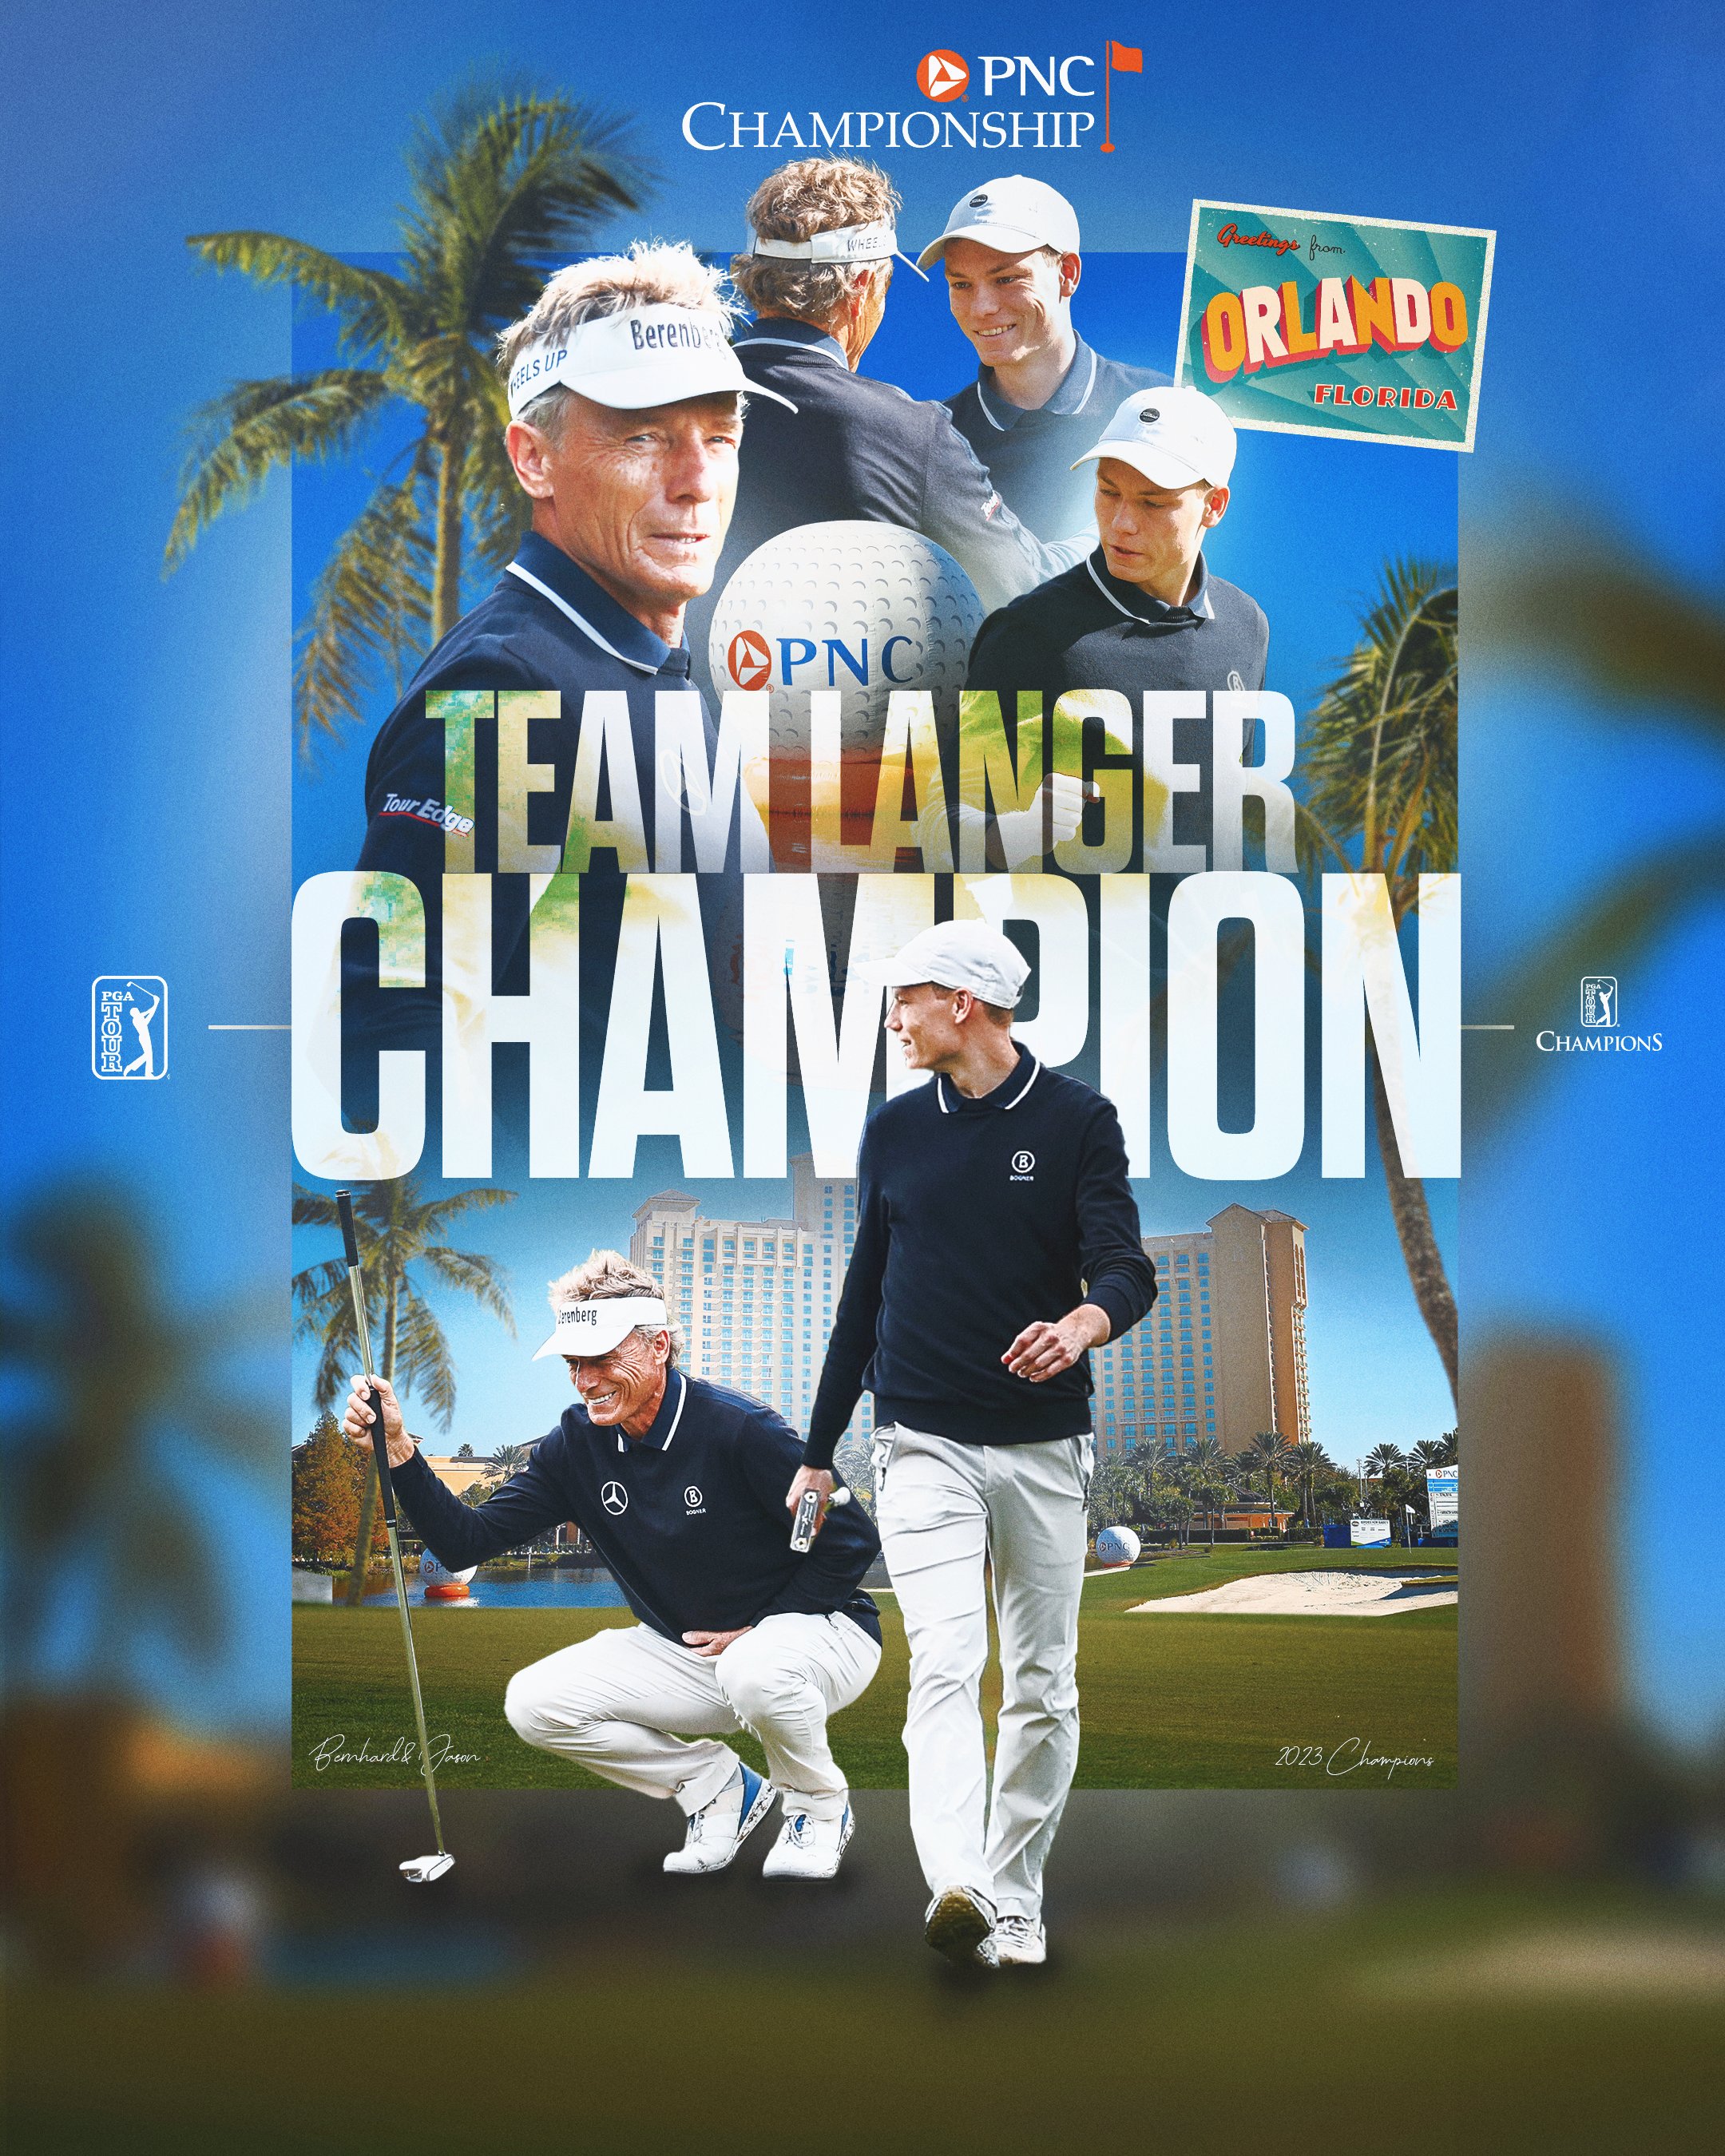 Team USA, Europe, and International to compete at World Champions Cup golf  tournament